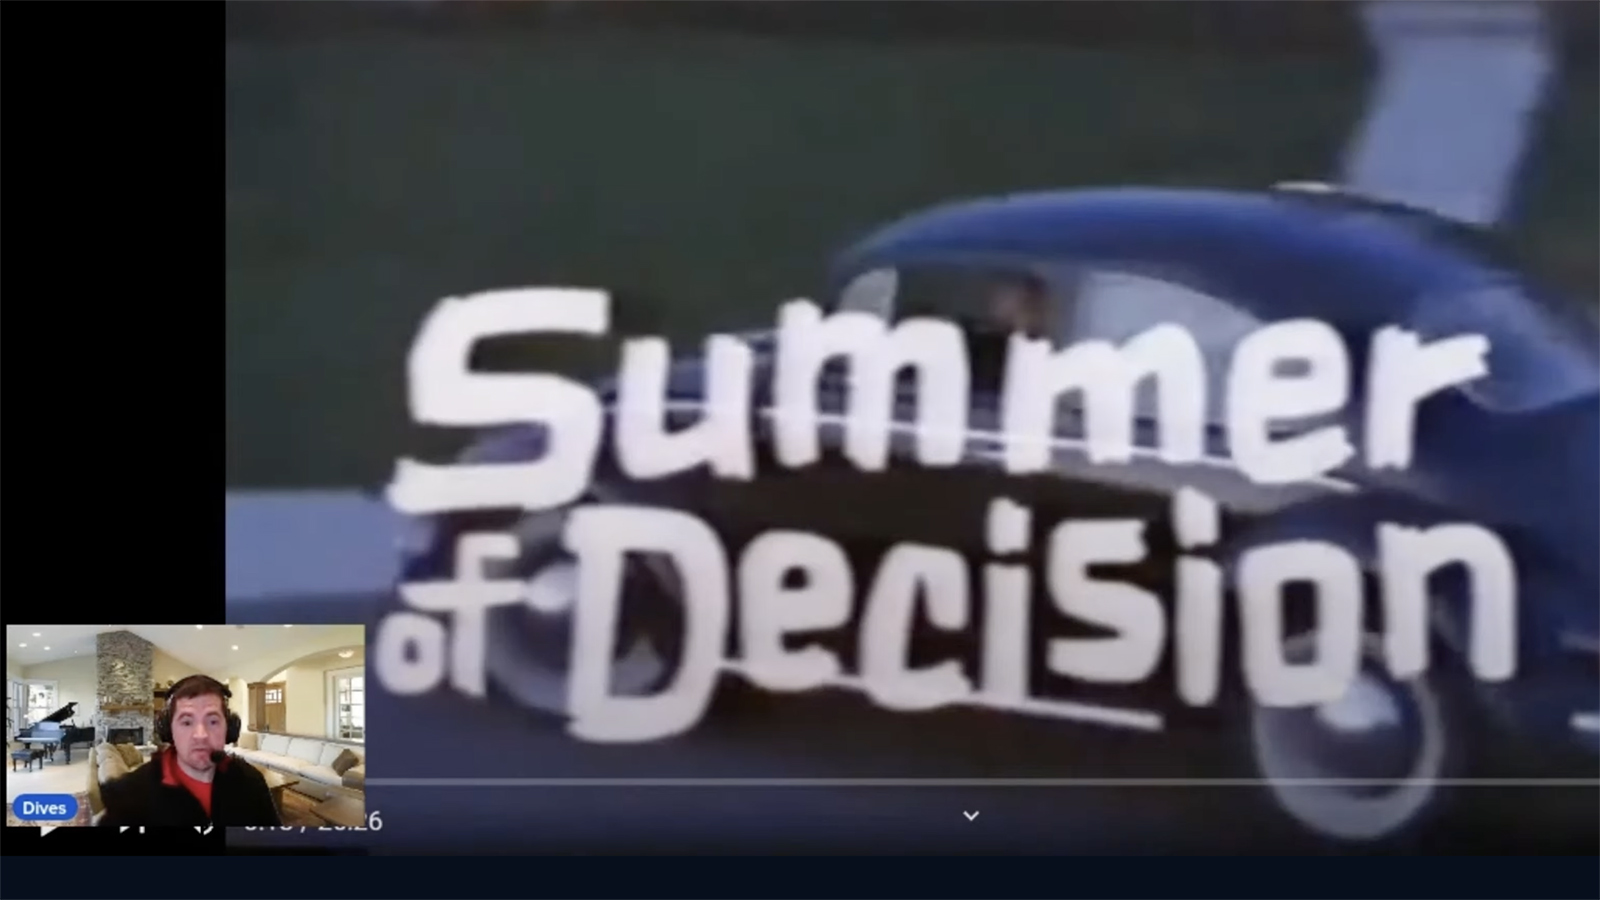 Dives, left, offers commentary while screening the 1962 film “Summer of Decision" on his Mormon Movie Reviews YouTube channel. (Video screen grab)